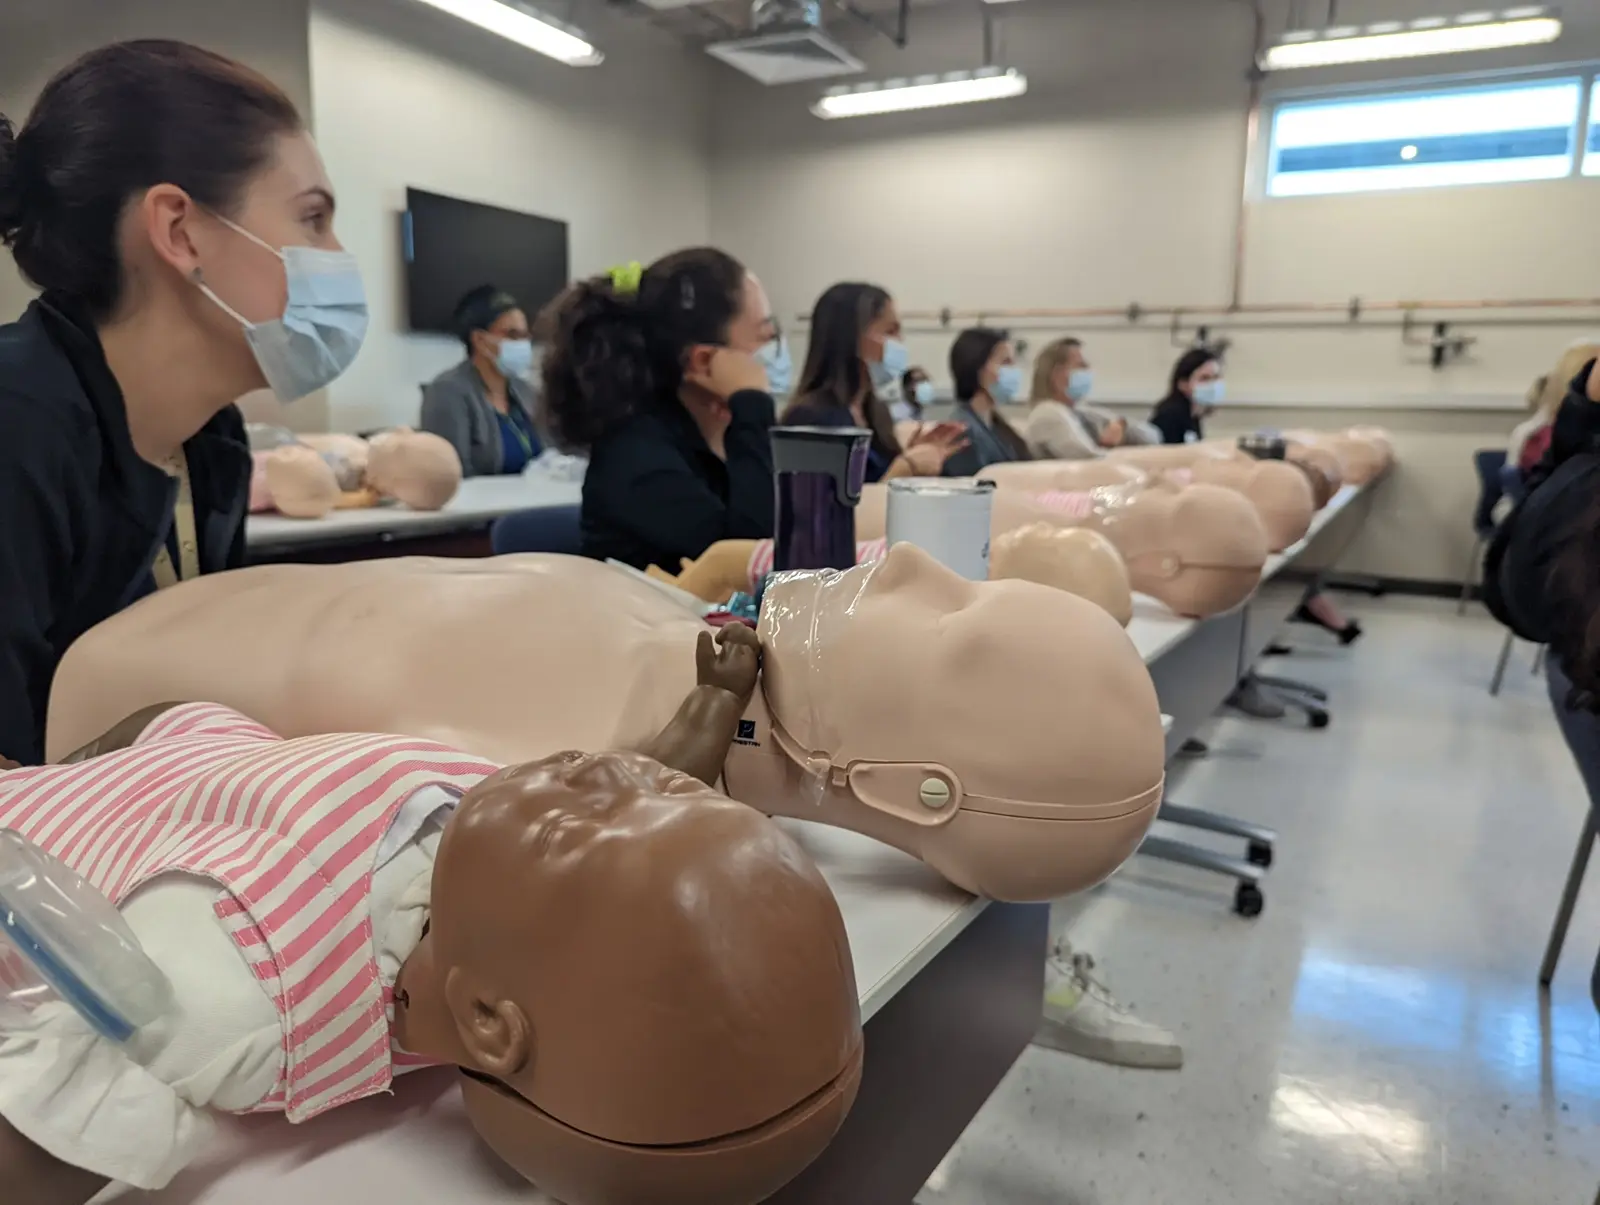 CAMLS A group of people wearing masks are seated at tables, attentively observing a training session. Mannequins of infants and adults are placed on the tables in front of them, suggesting that the session is related to CPR or medical training.